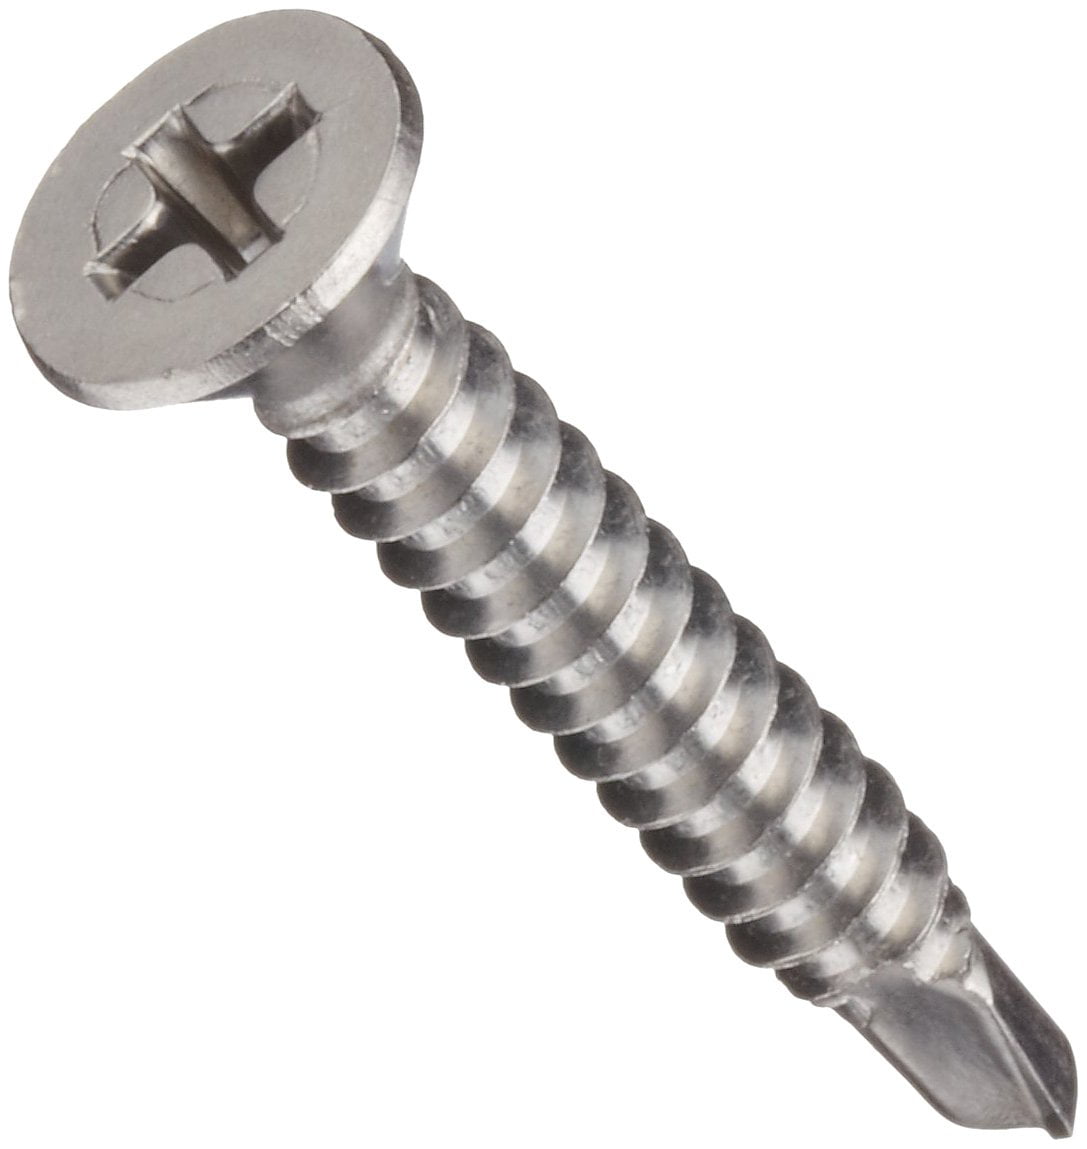 Flat Head 1-5/8 Length Pack of 100 Zinc Plated Finish Phillips Drive #8-18 Threads Steel Self-Drilling Screw